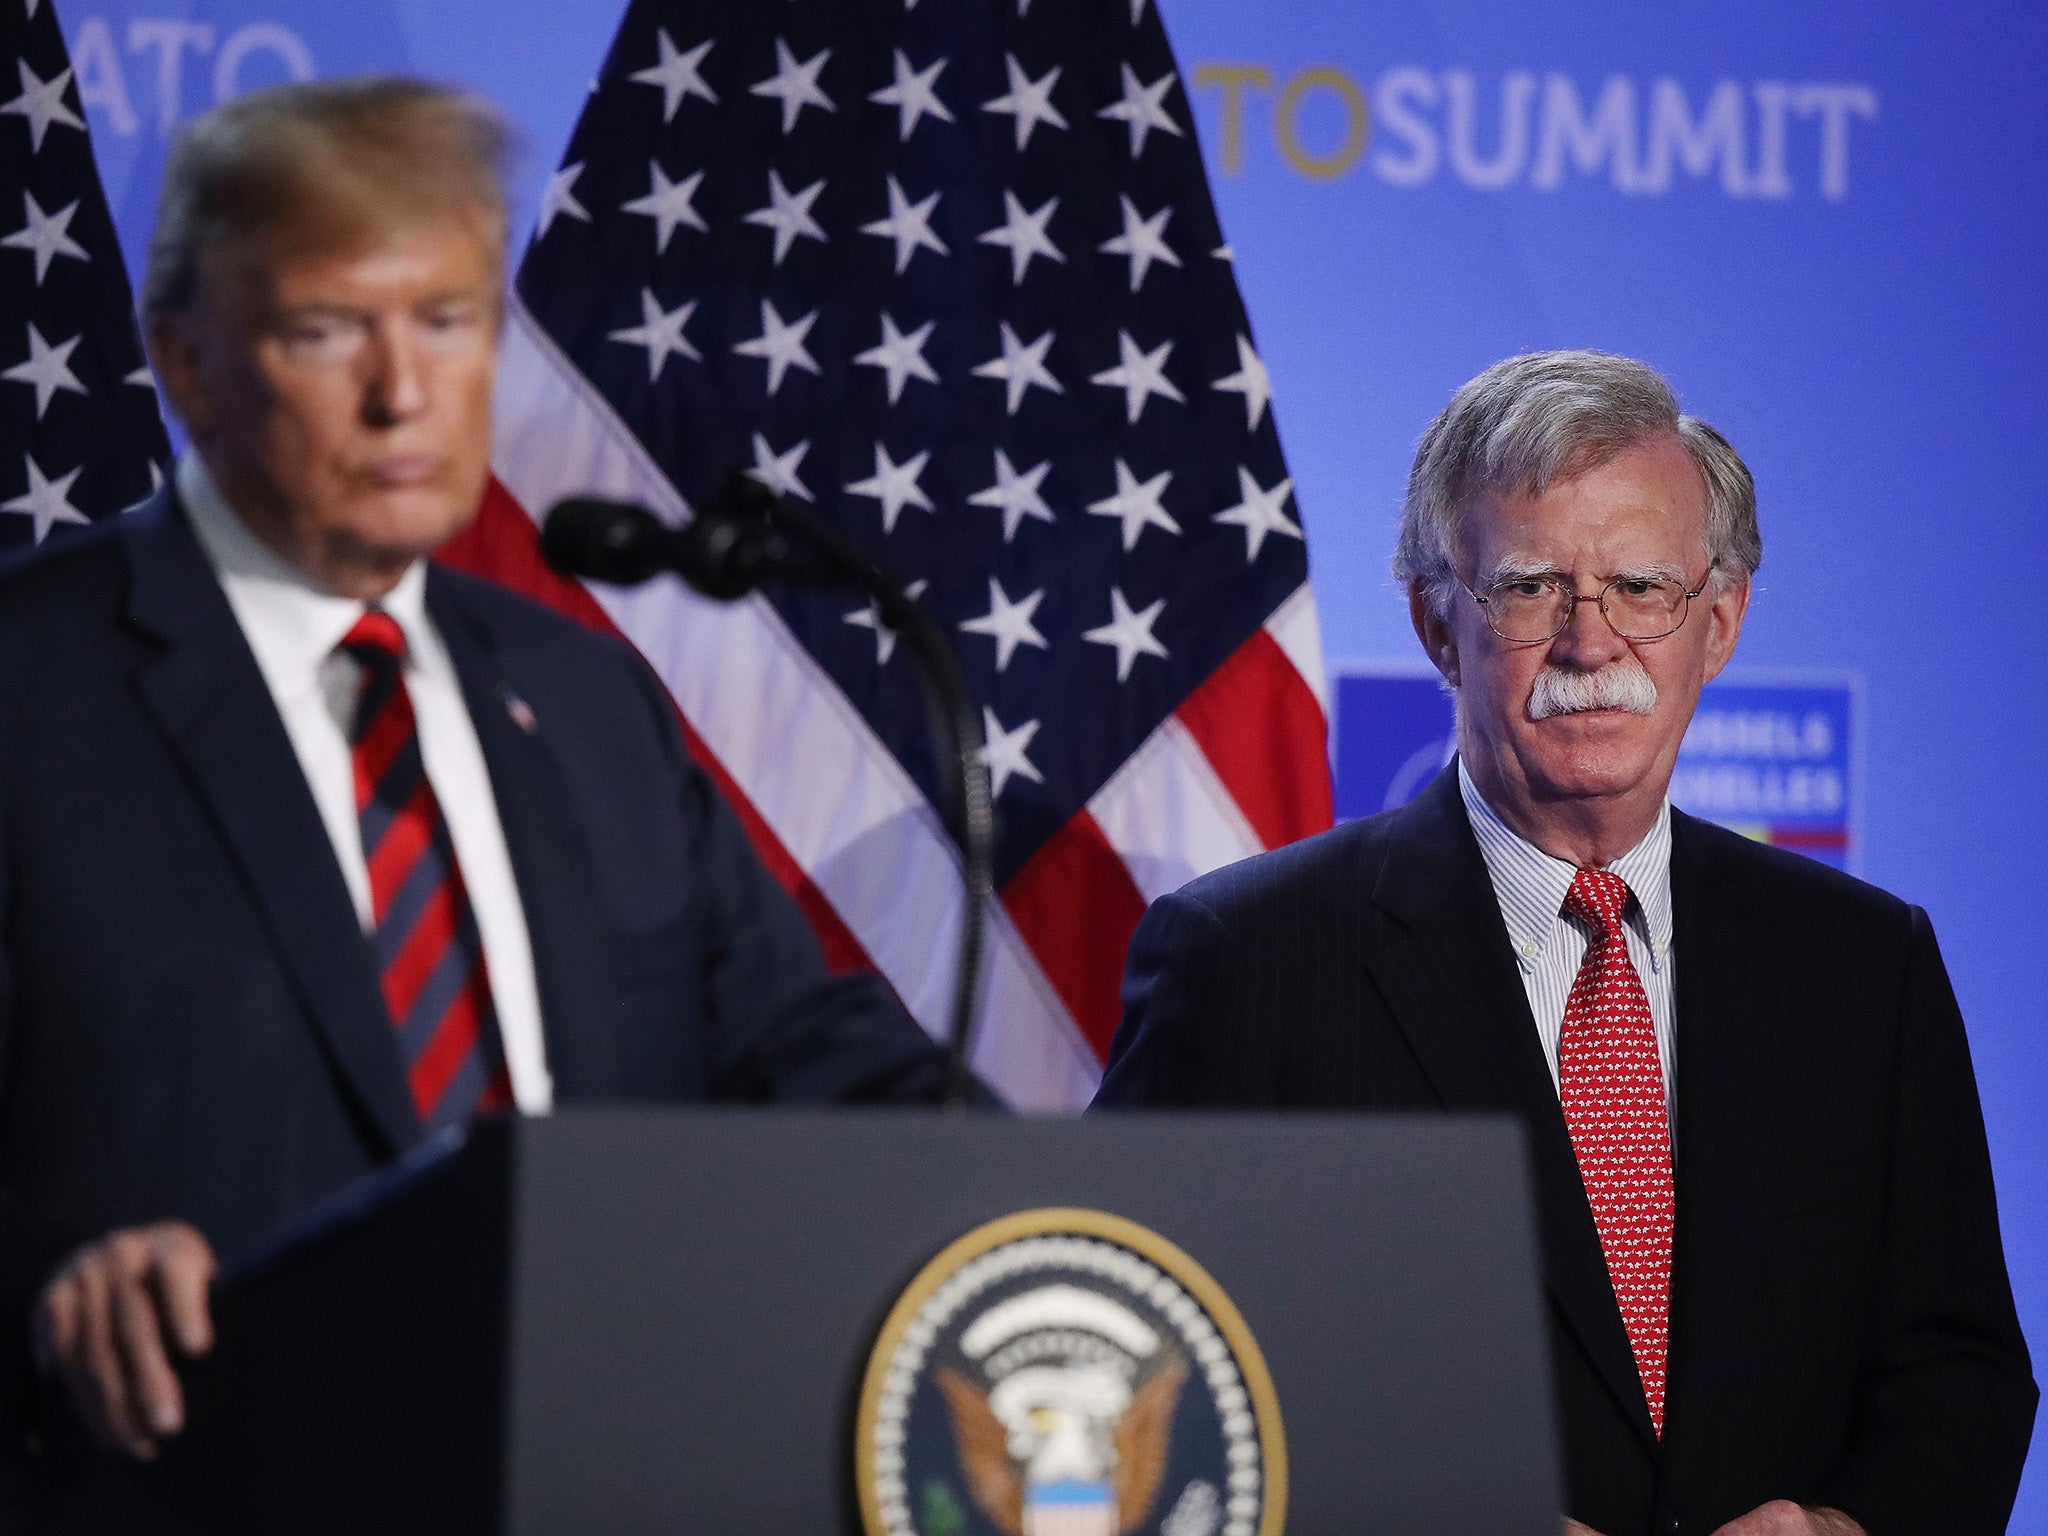 Washington said on Tuesday Bolton would meet Russian officials as a follow-up to the Helsinki summit